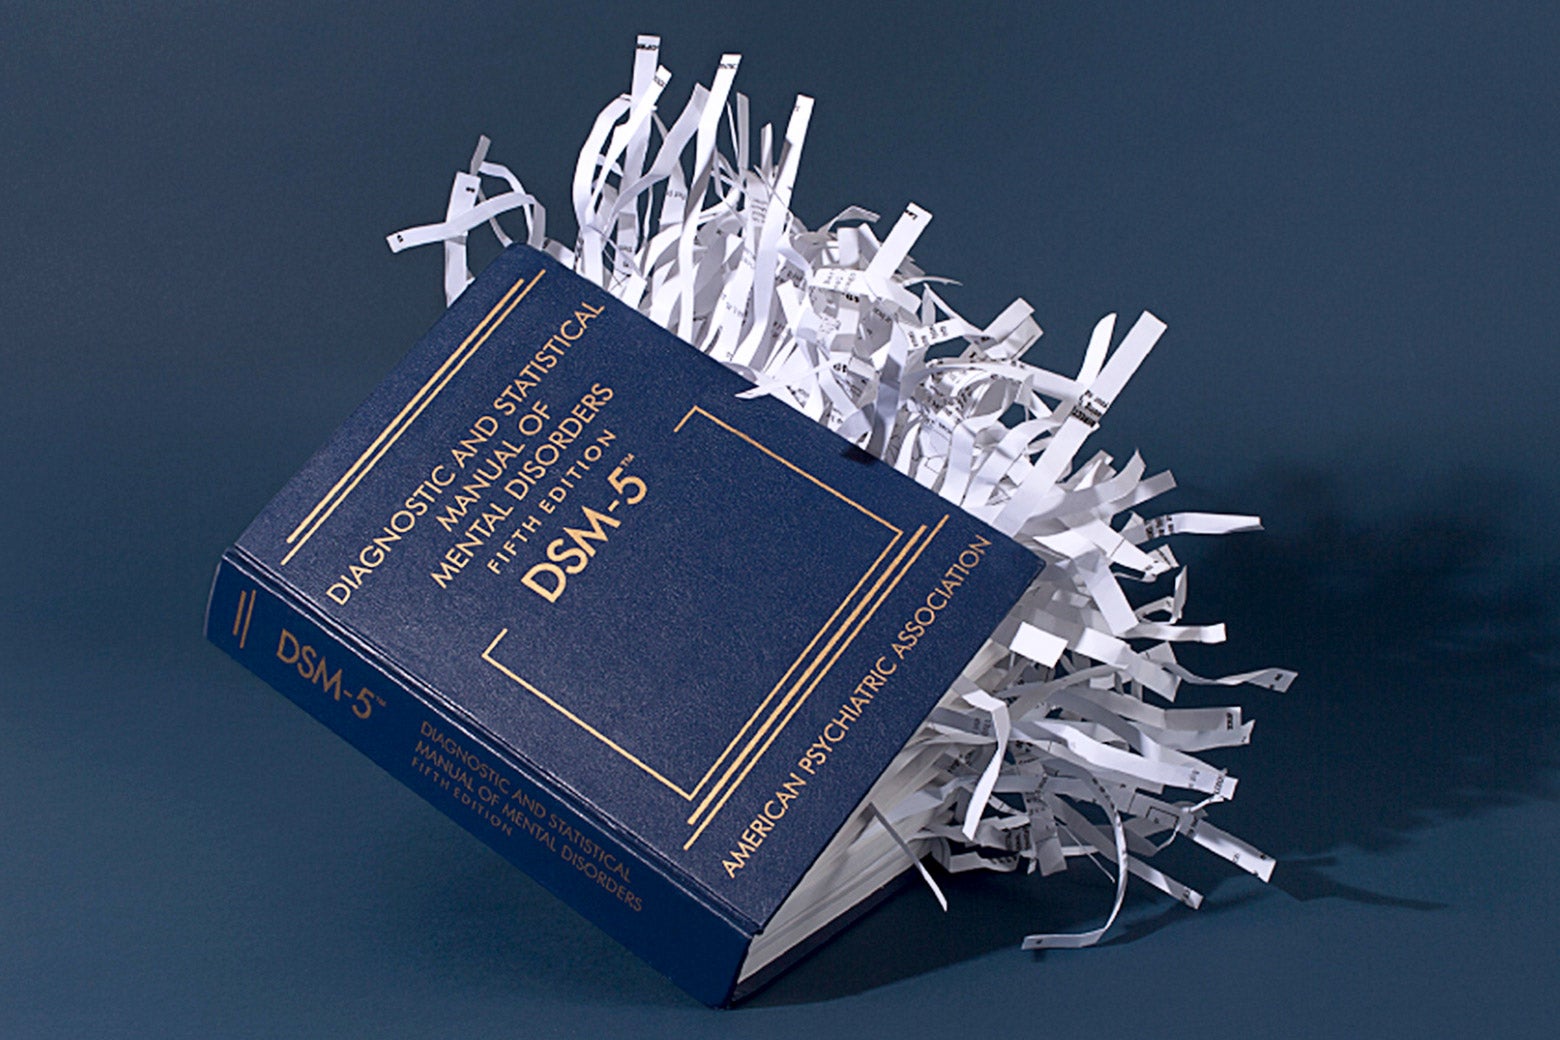 A book with shredded pages.